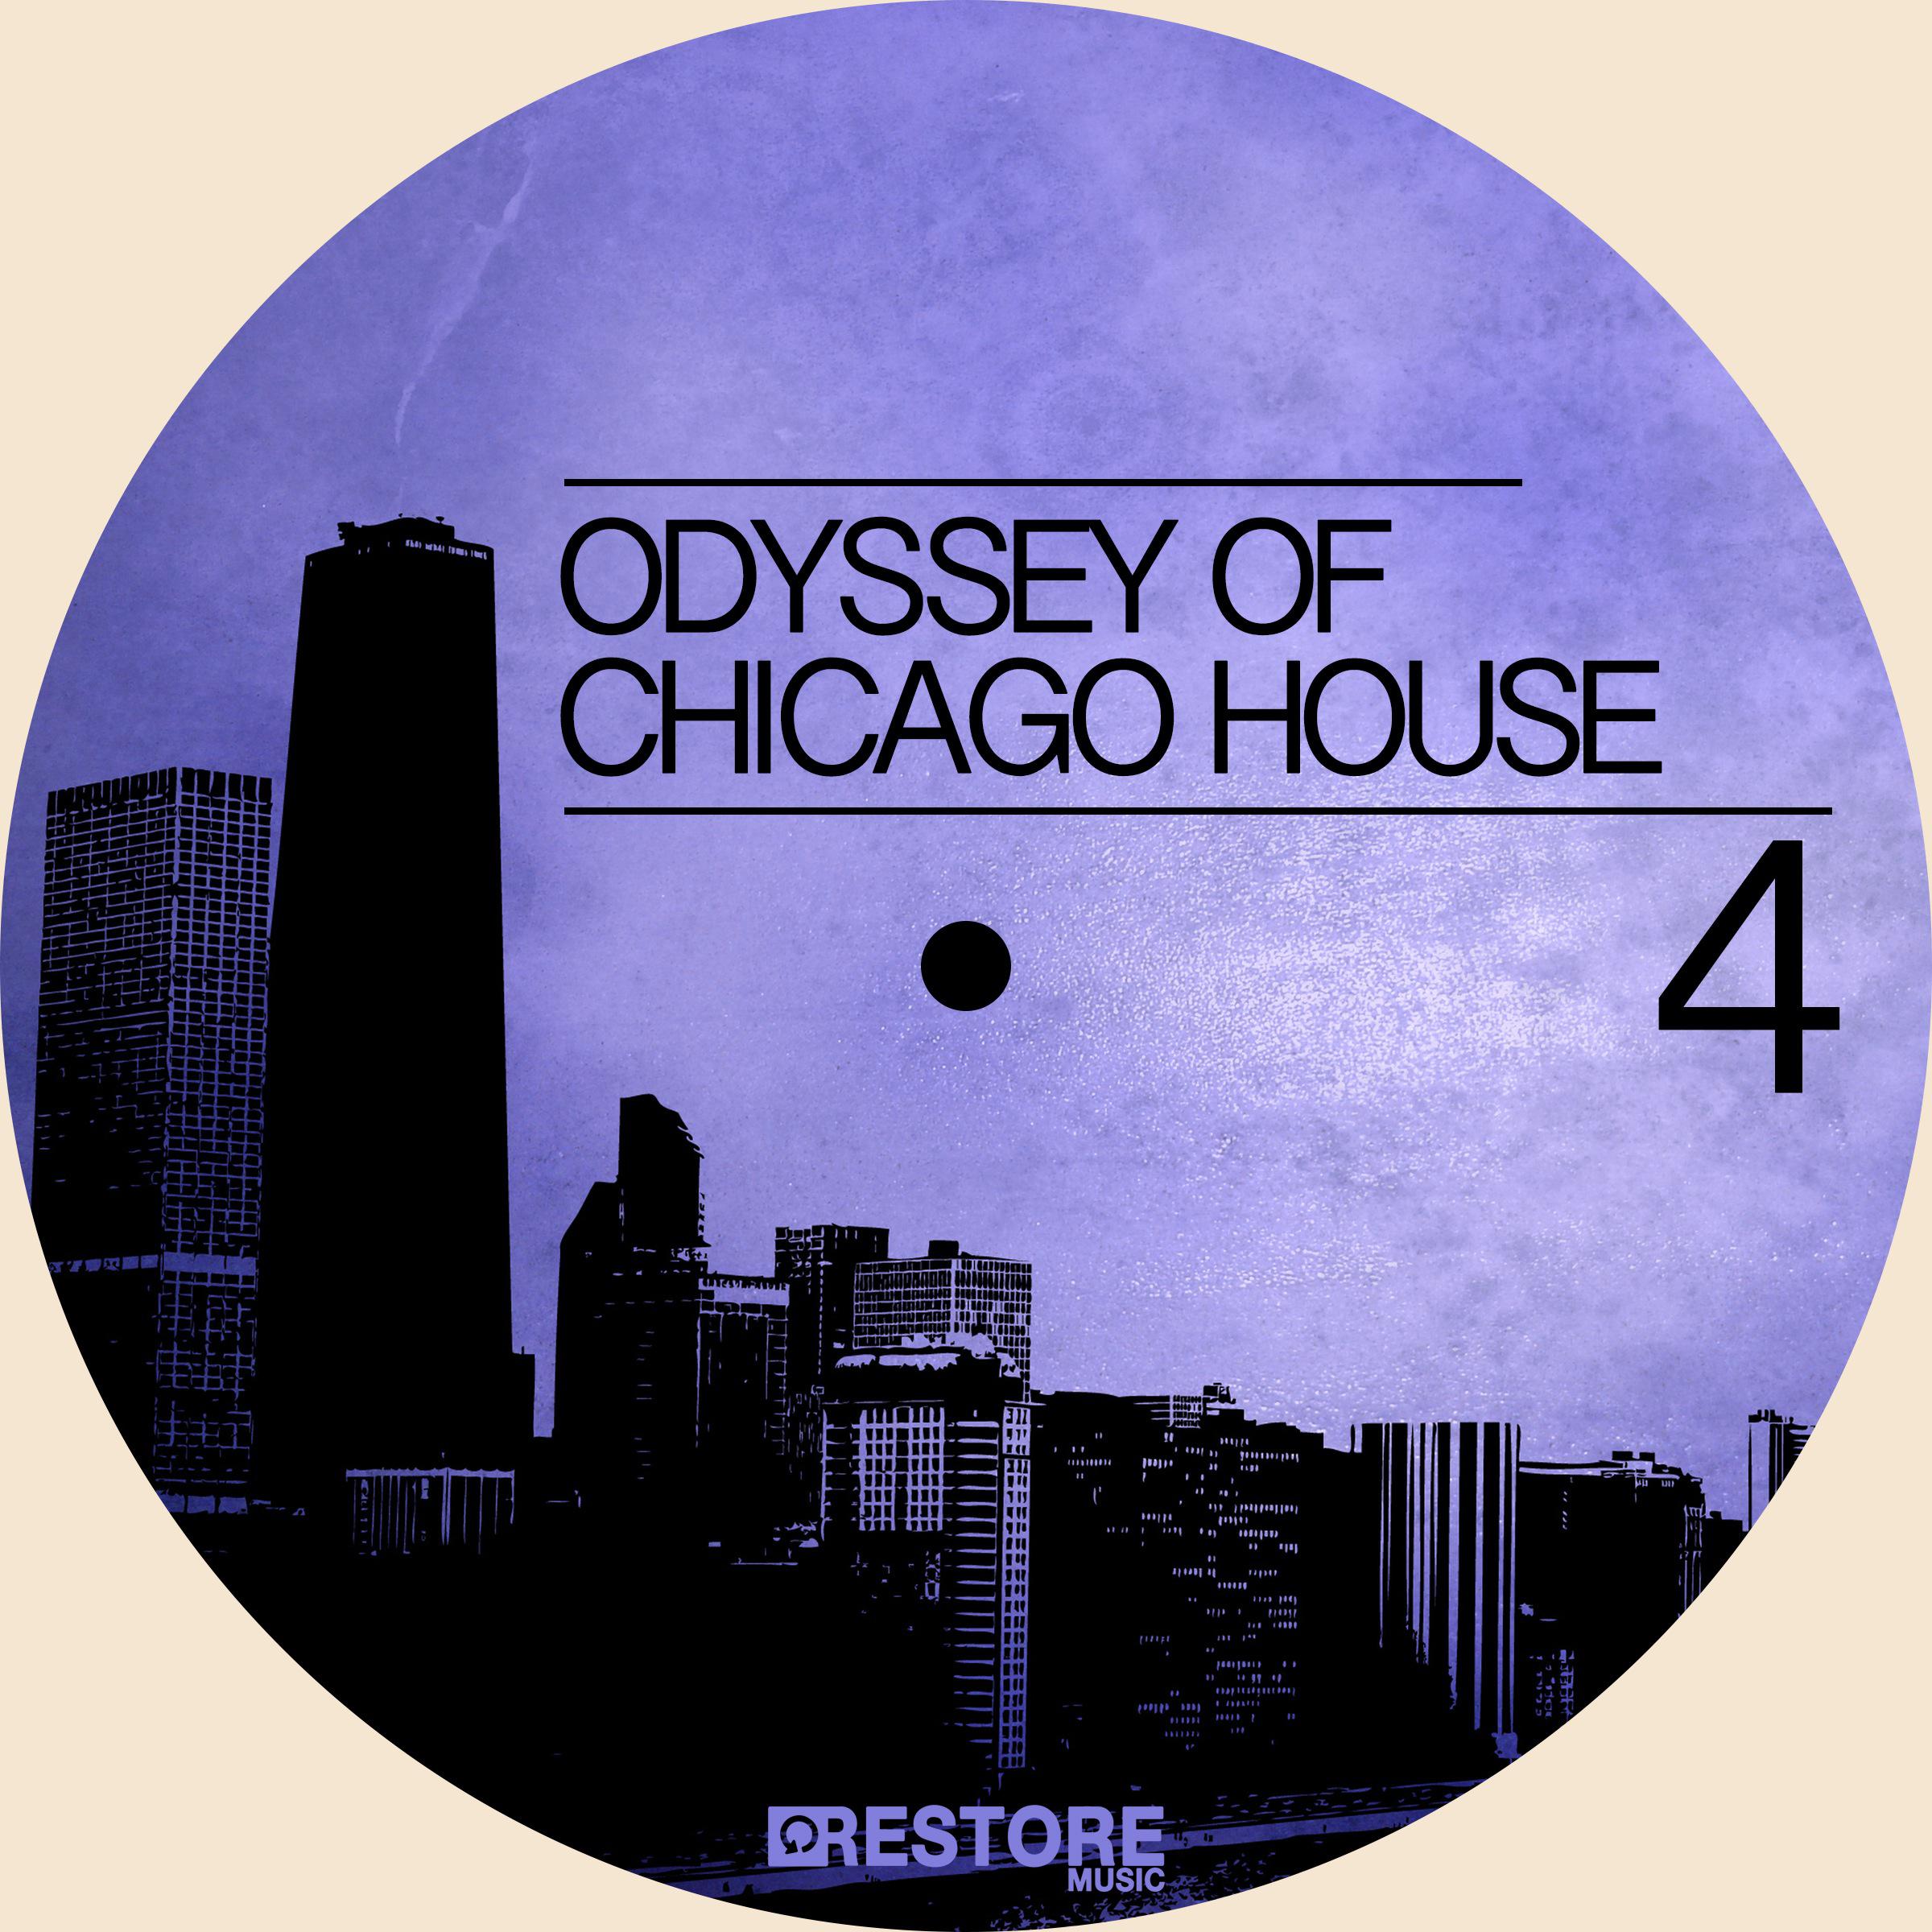 Odyssey of Chicago House, Vol. 4